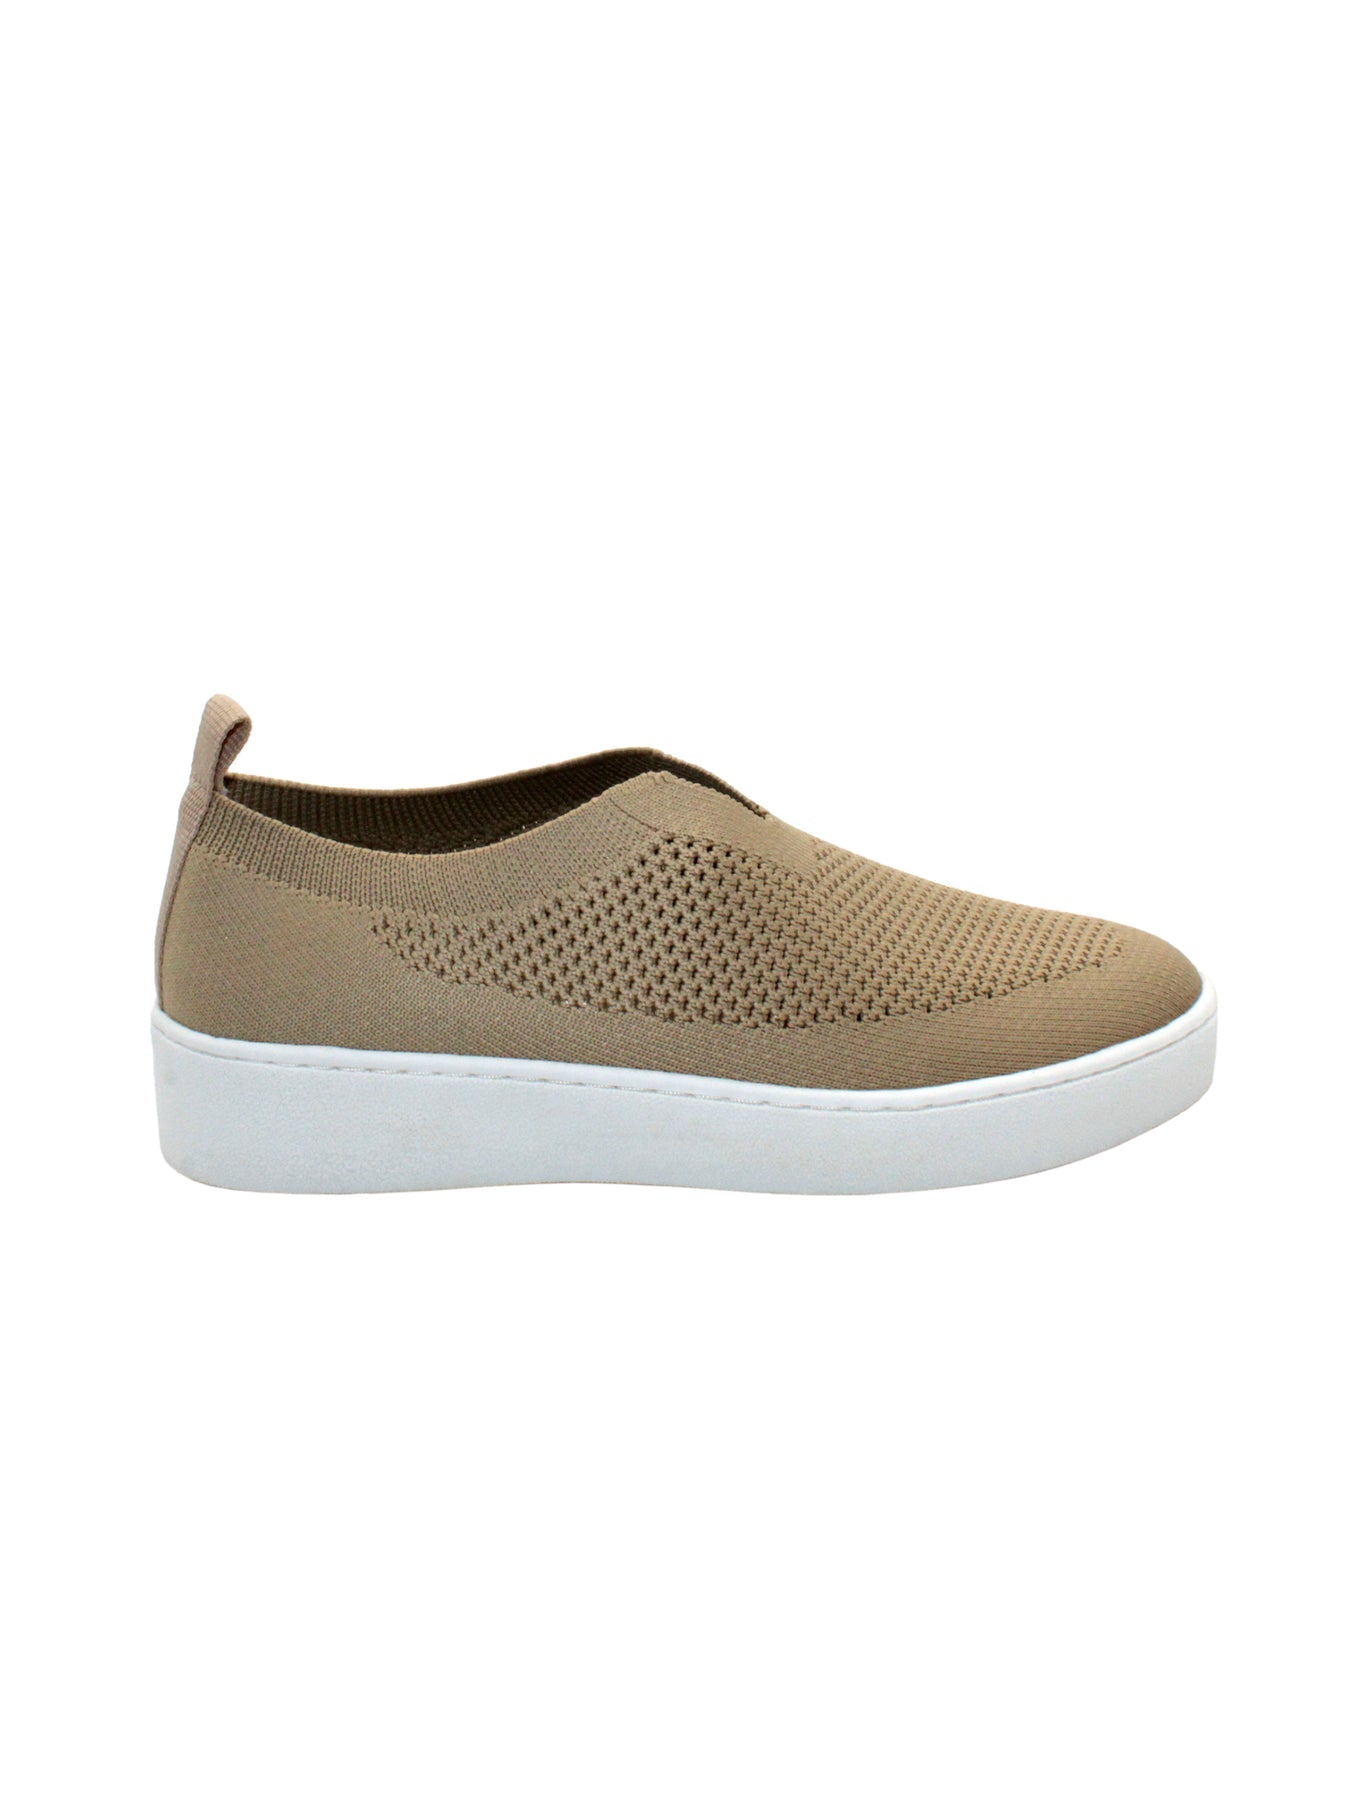 VOL - Volatile Volatile Sunday Sneaker Breathable Stretch Knit - Little Miss Muffin Children & Home